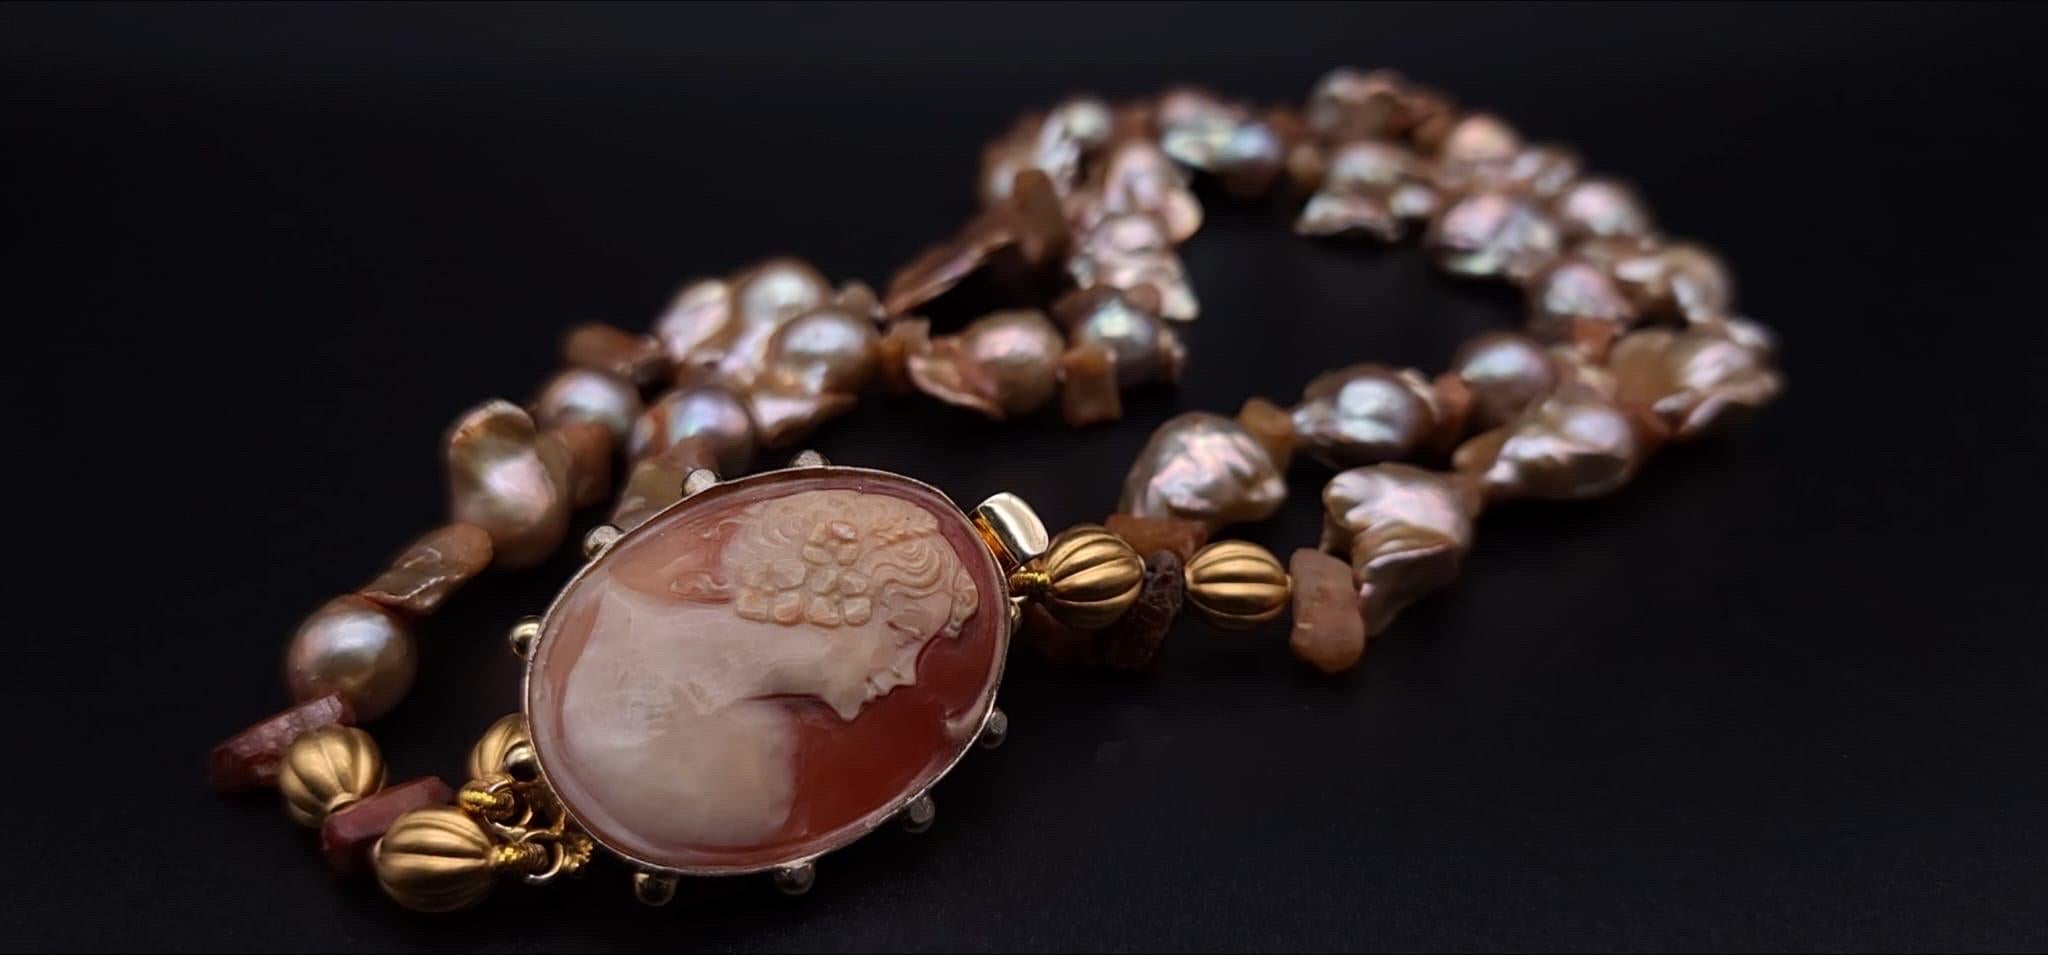 A.Jeschel Stunning Gold Baroque Pearl necklace with an Italian cameo side clasp. 6